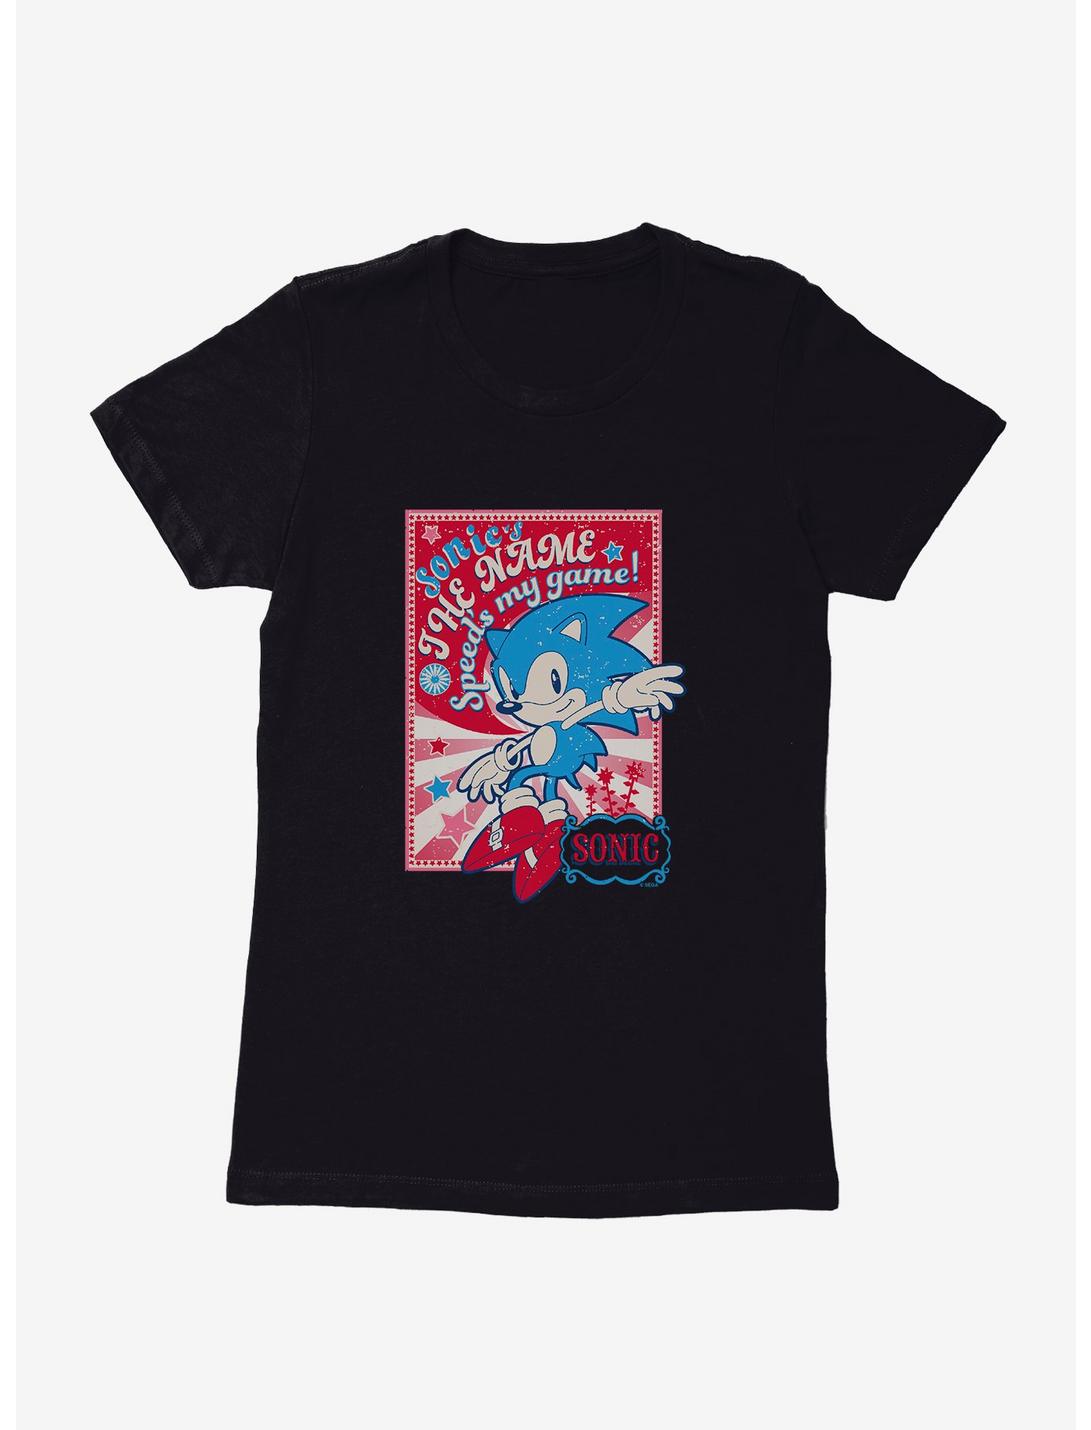 Sonic The Hedgehog Sonic's The Name Womens T-Shirt, , hi-res